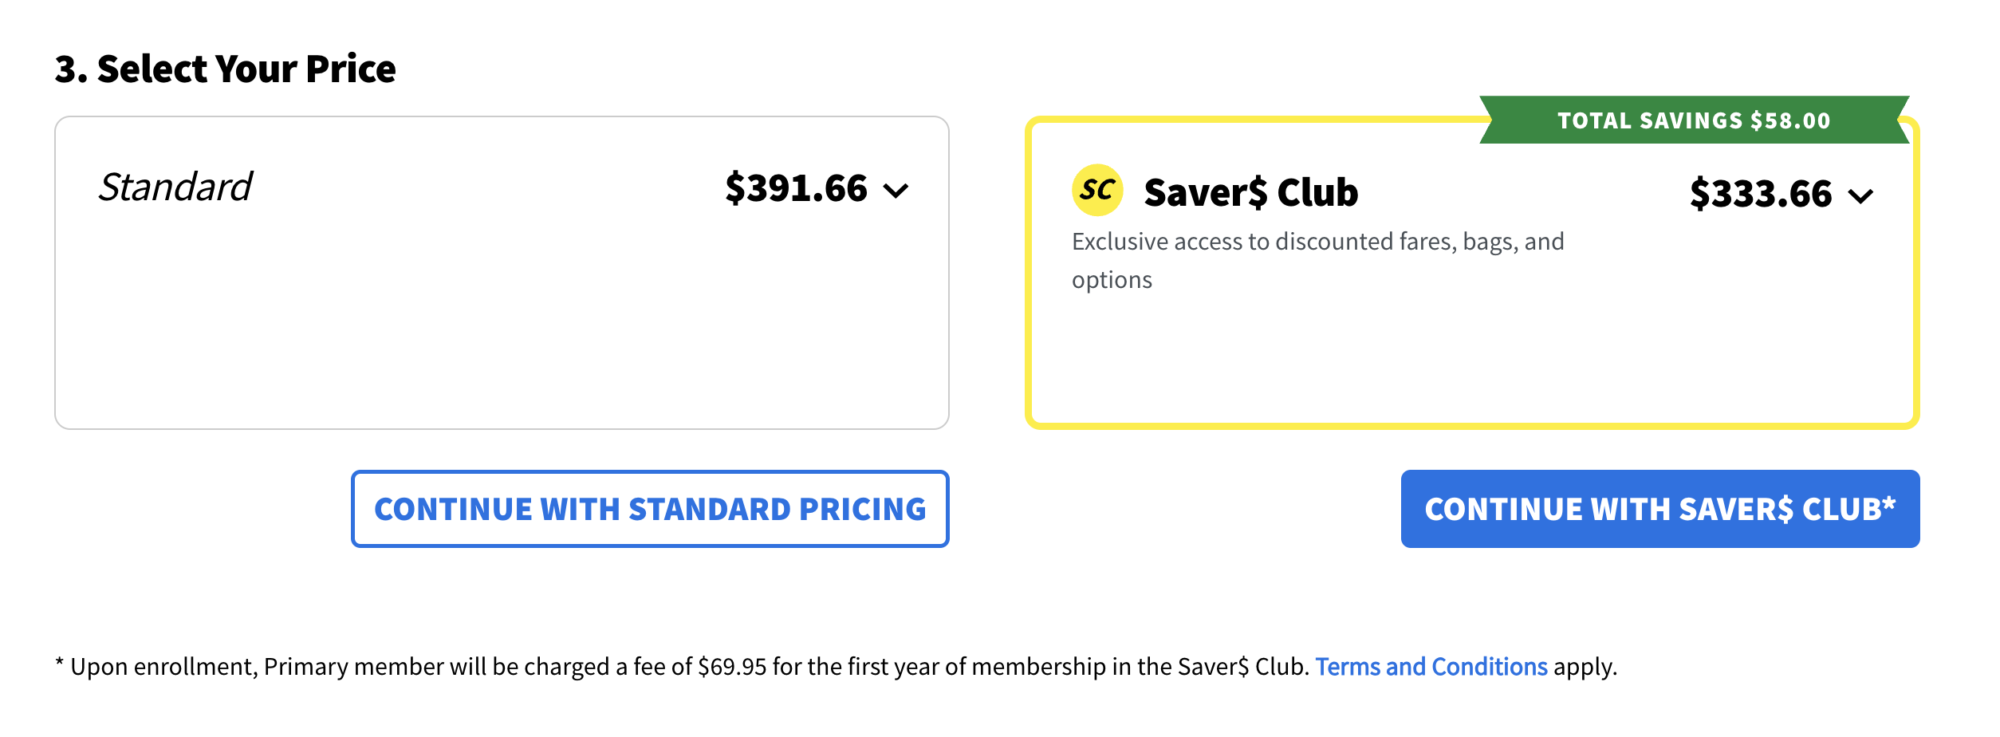 A screenshot from the Spirit site enticing customers to sign up for the Saver$ Club